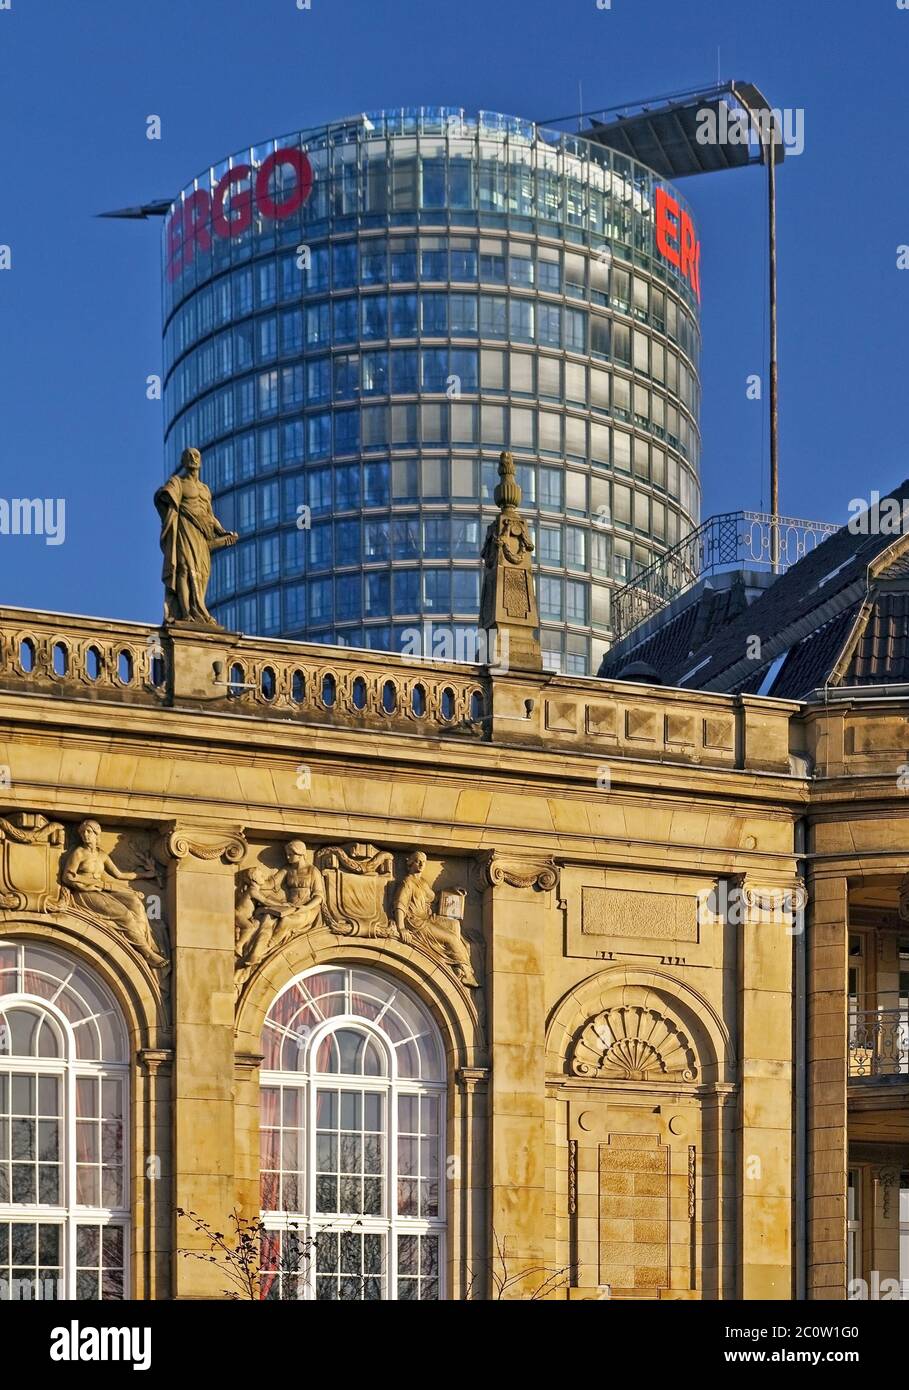 The district government building and high-rise building of the Ergo headquarters, Duesseldorf Stock Photo